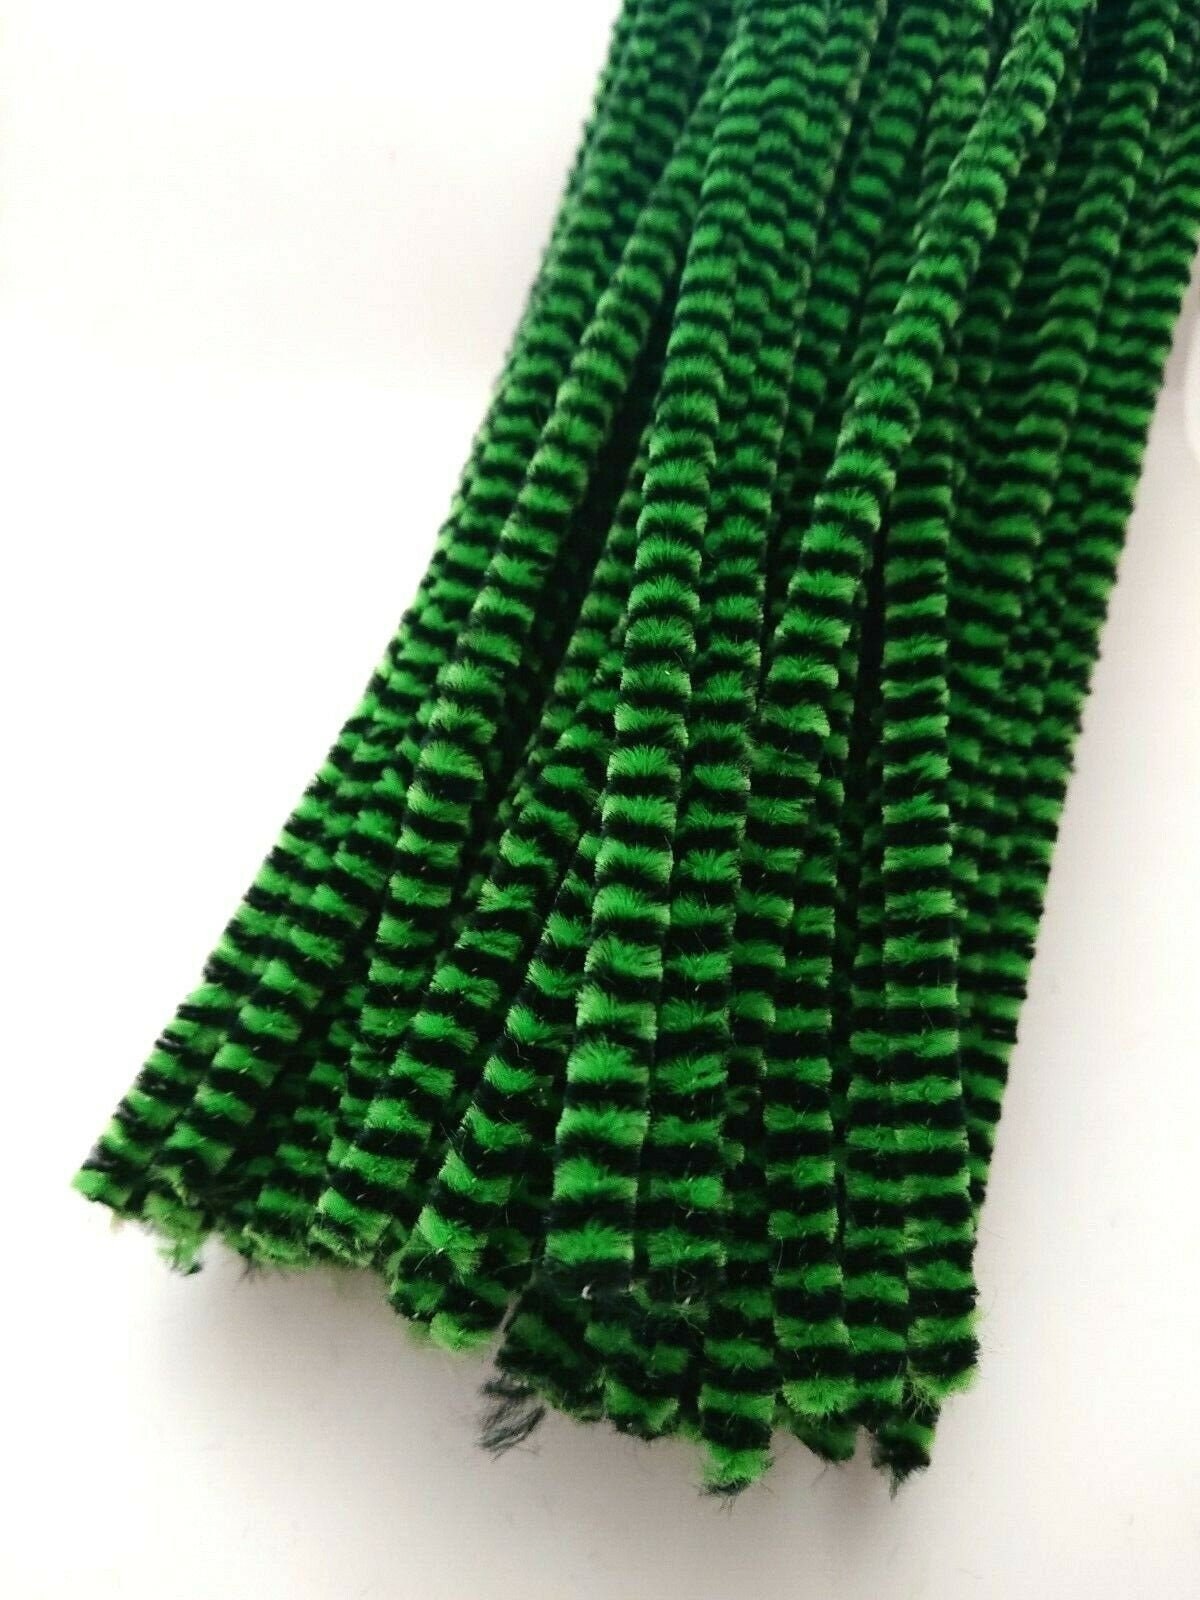 Chenille Stems 100 Pcs Striped Pipe Cleaners for Arts and Crafts,10 Colors